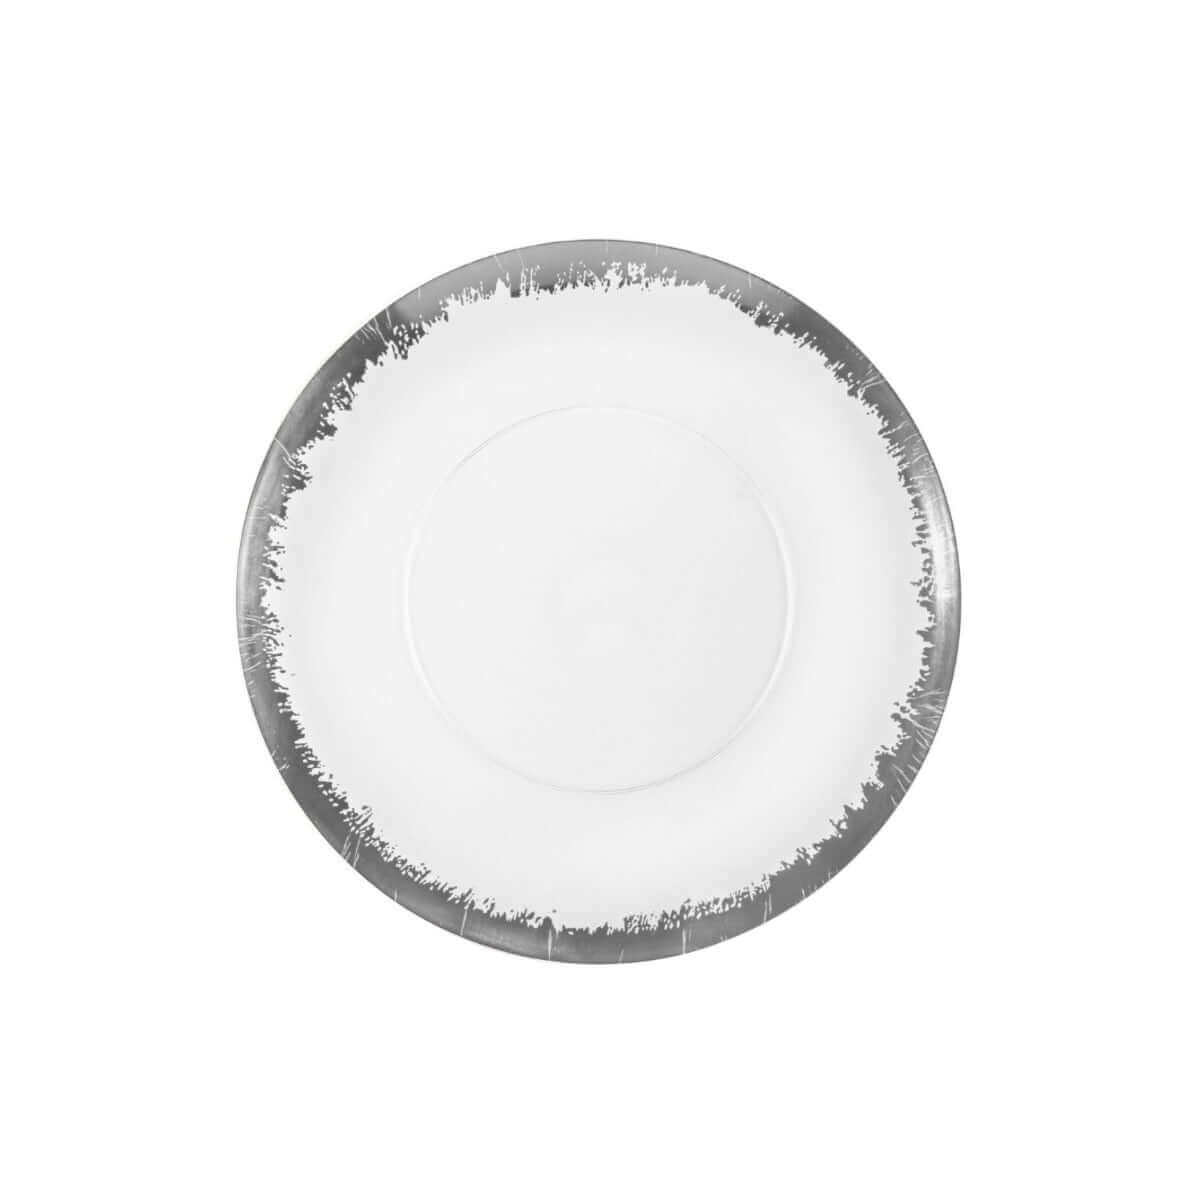 8" Silver Scratched Design Plastic Plates (40 Count) - Yom Tov Settings